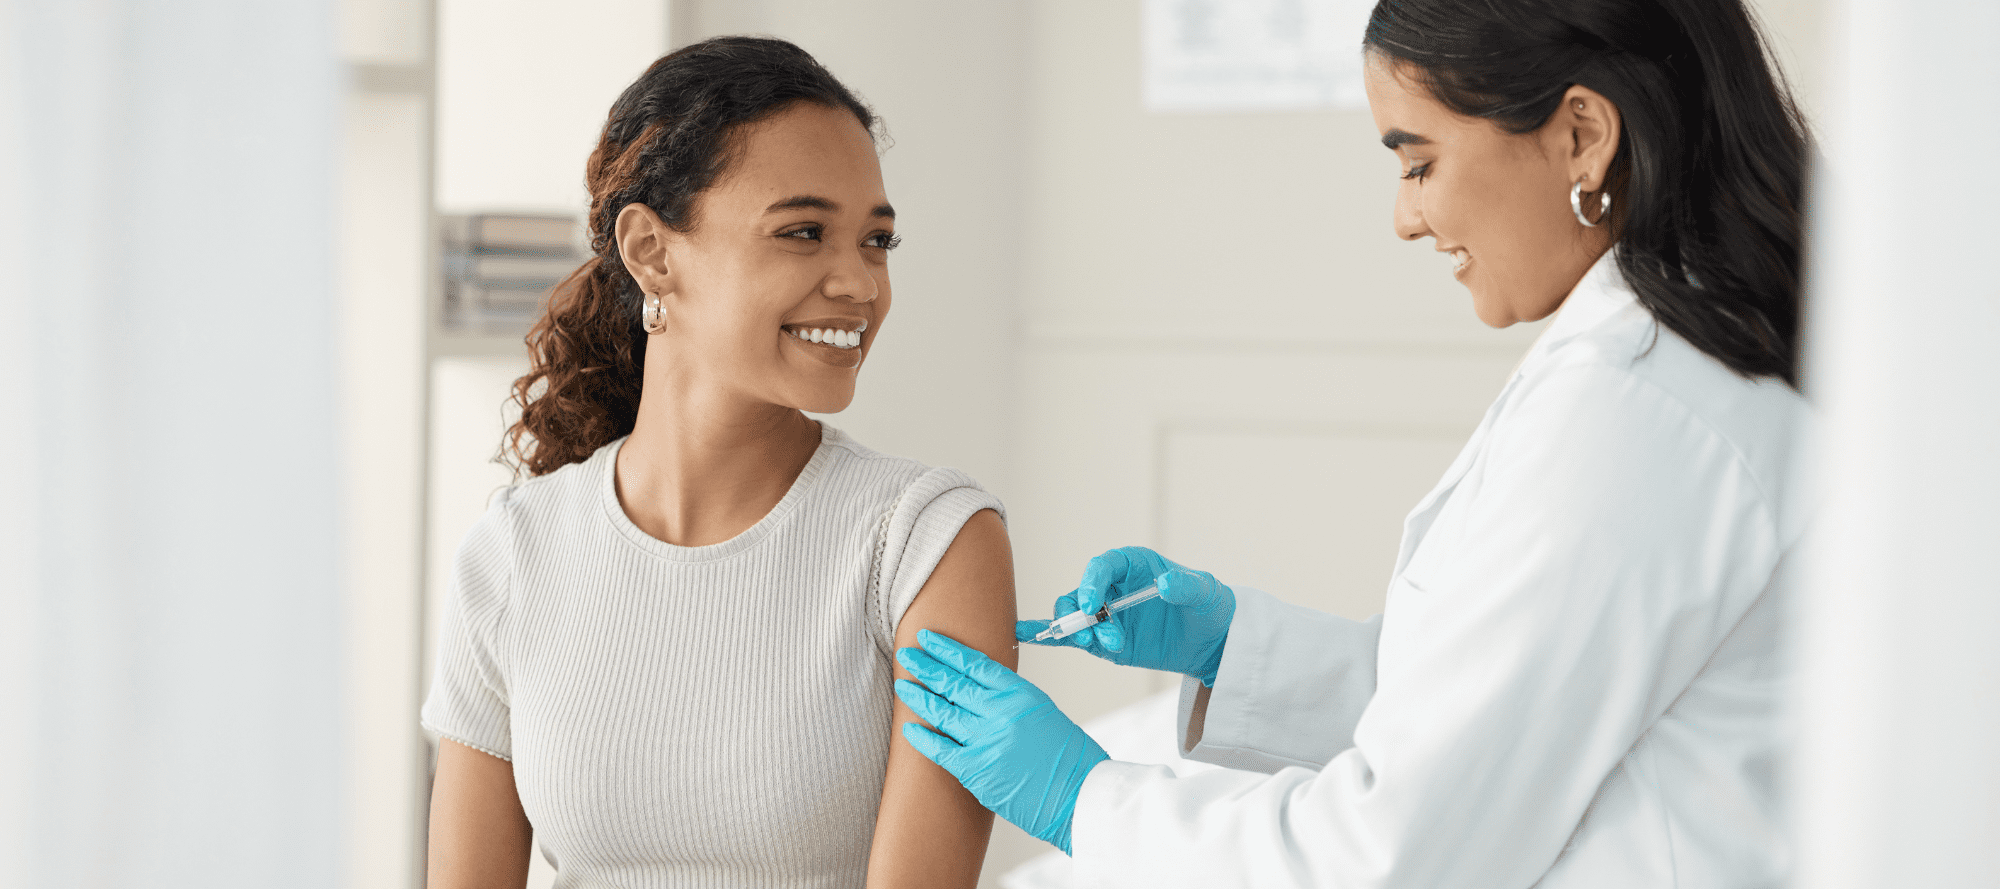 Young woman smiling with her sleeve rolled up as she gets an injection from a doctor on her upper arm